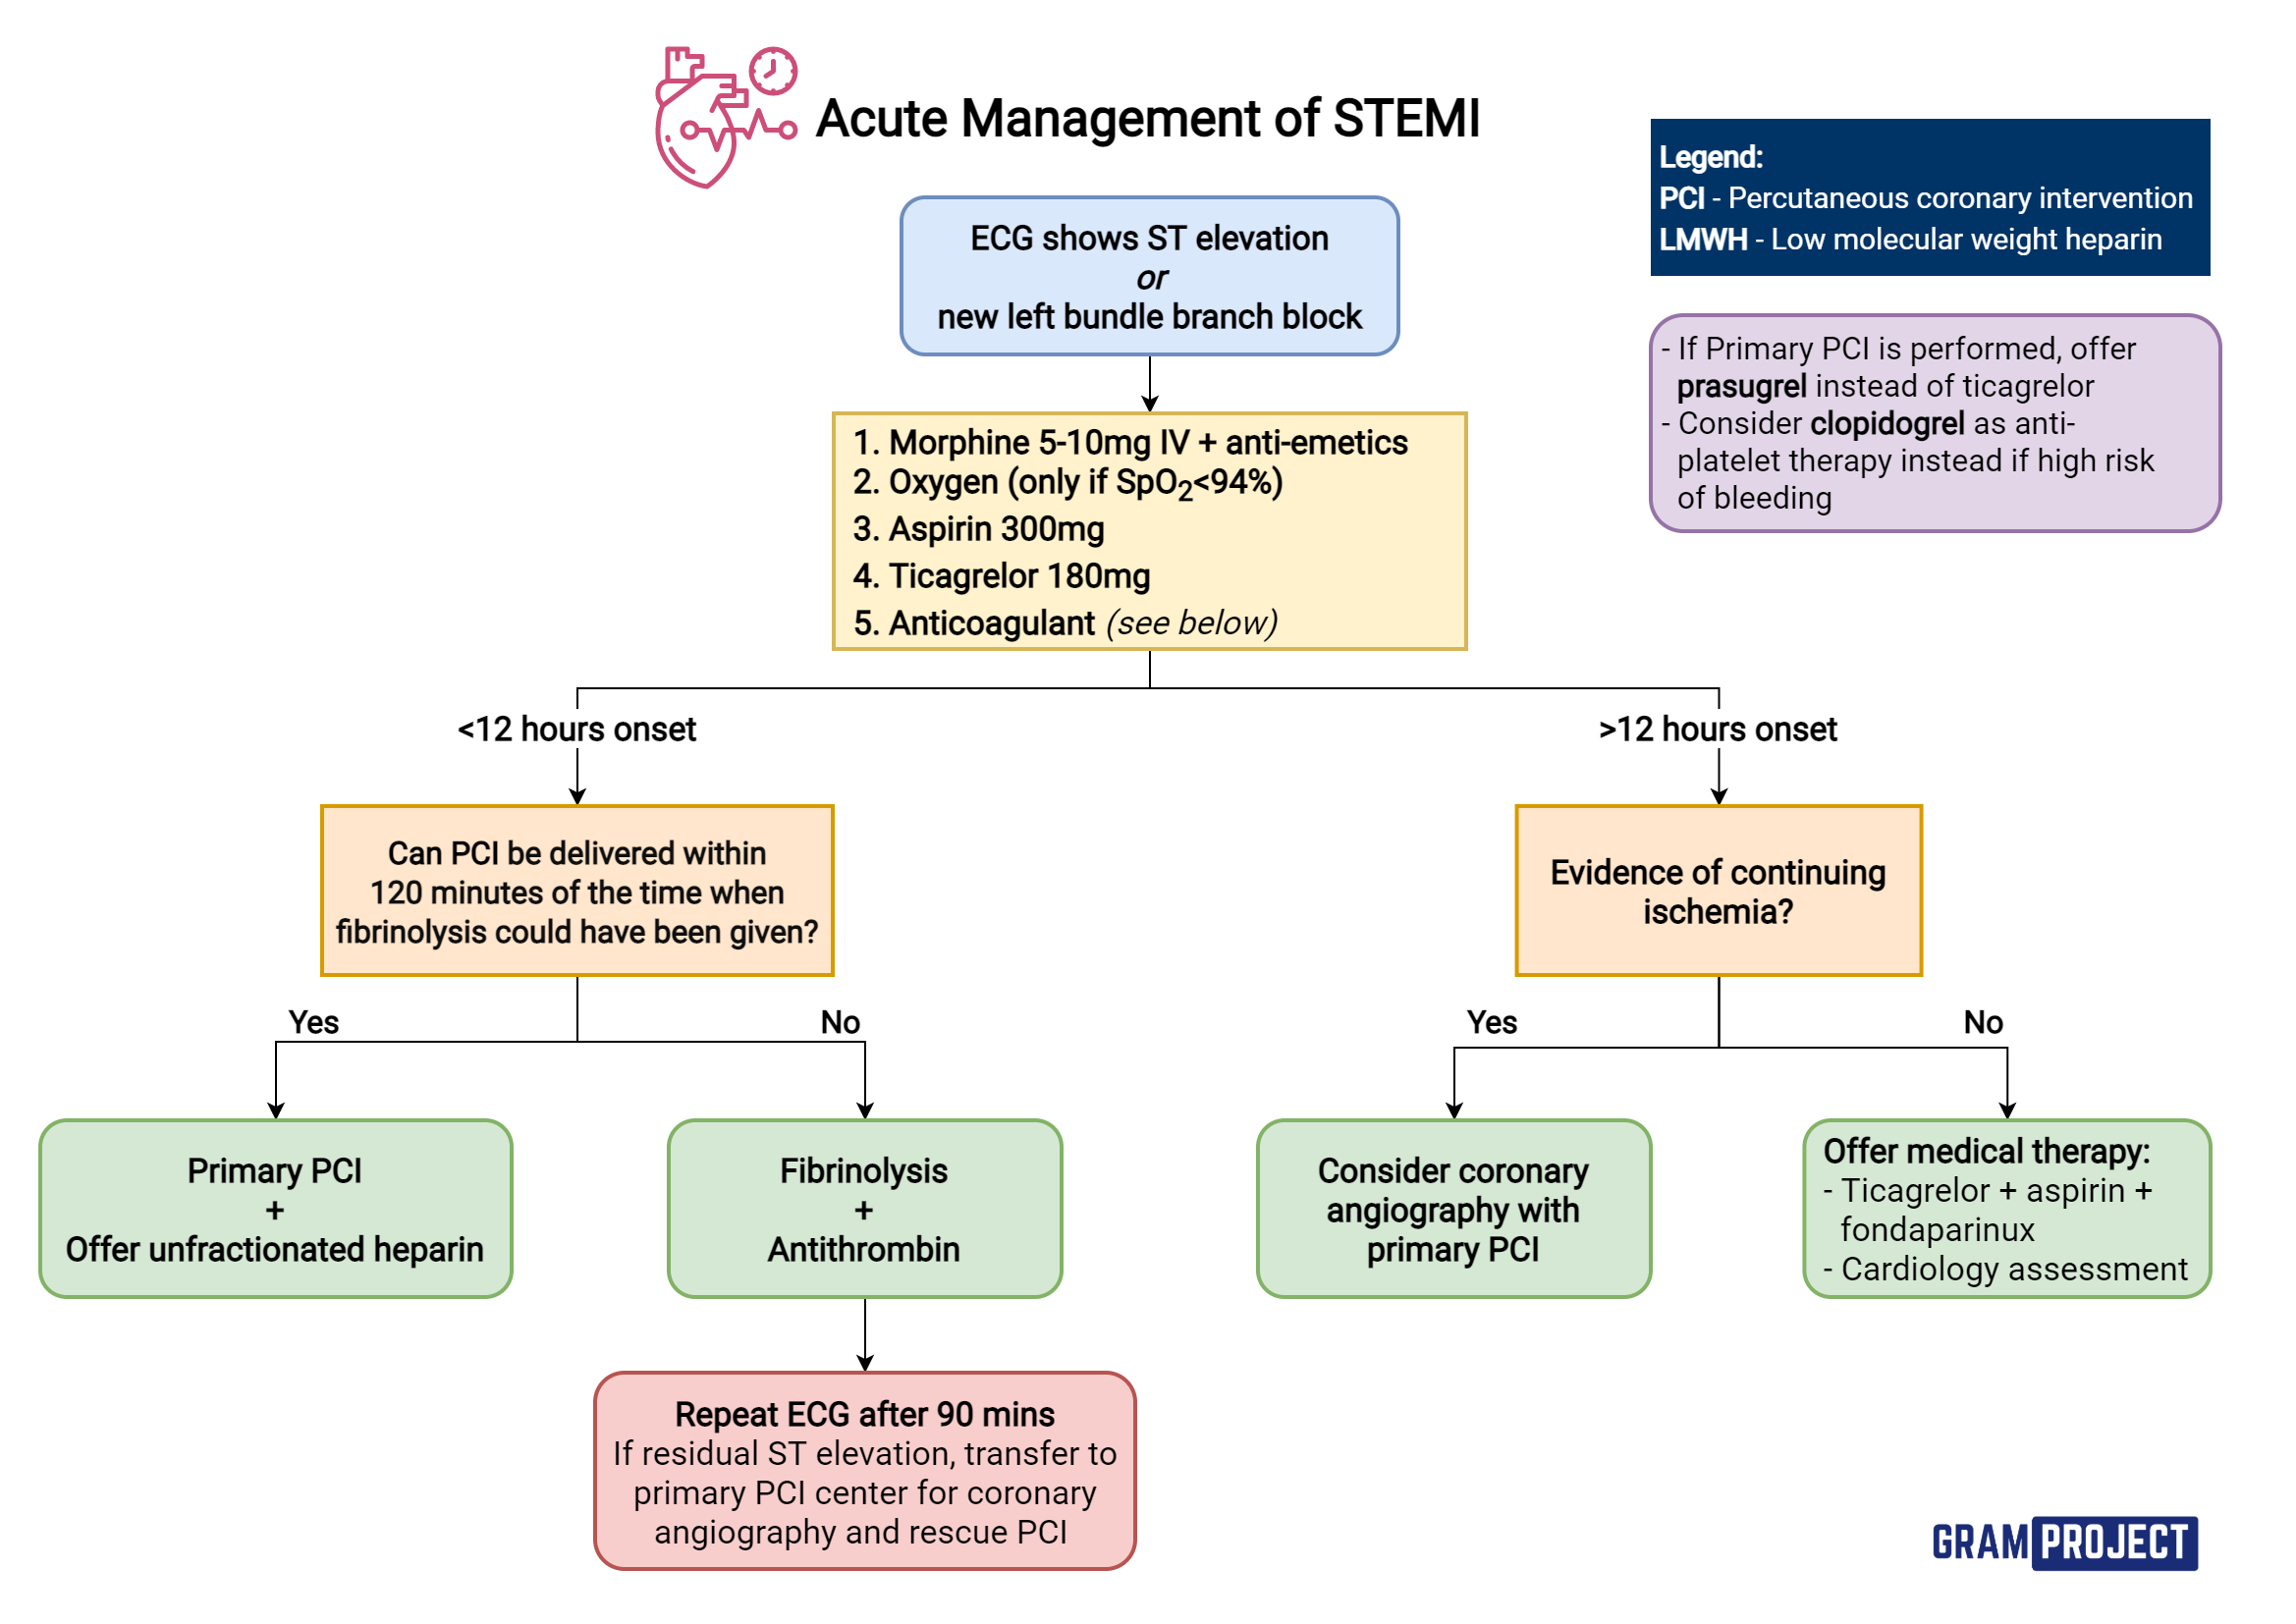 Flowchart guide to acute management of STEMI based on NICE guidelines